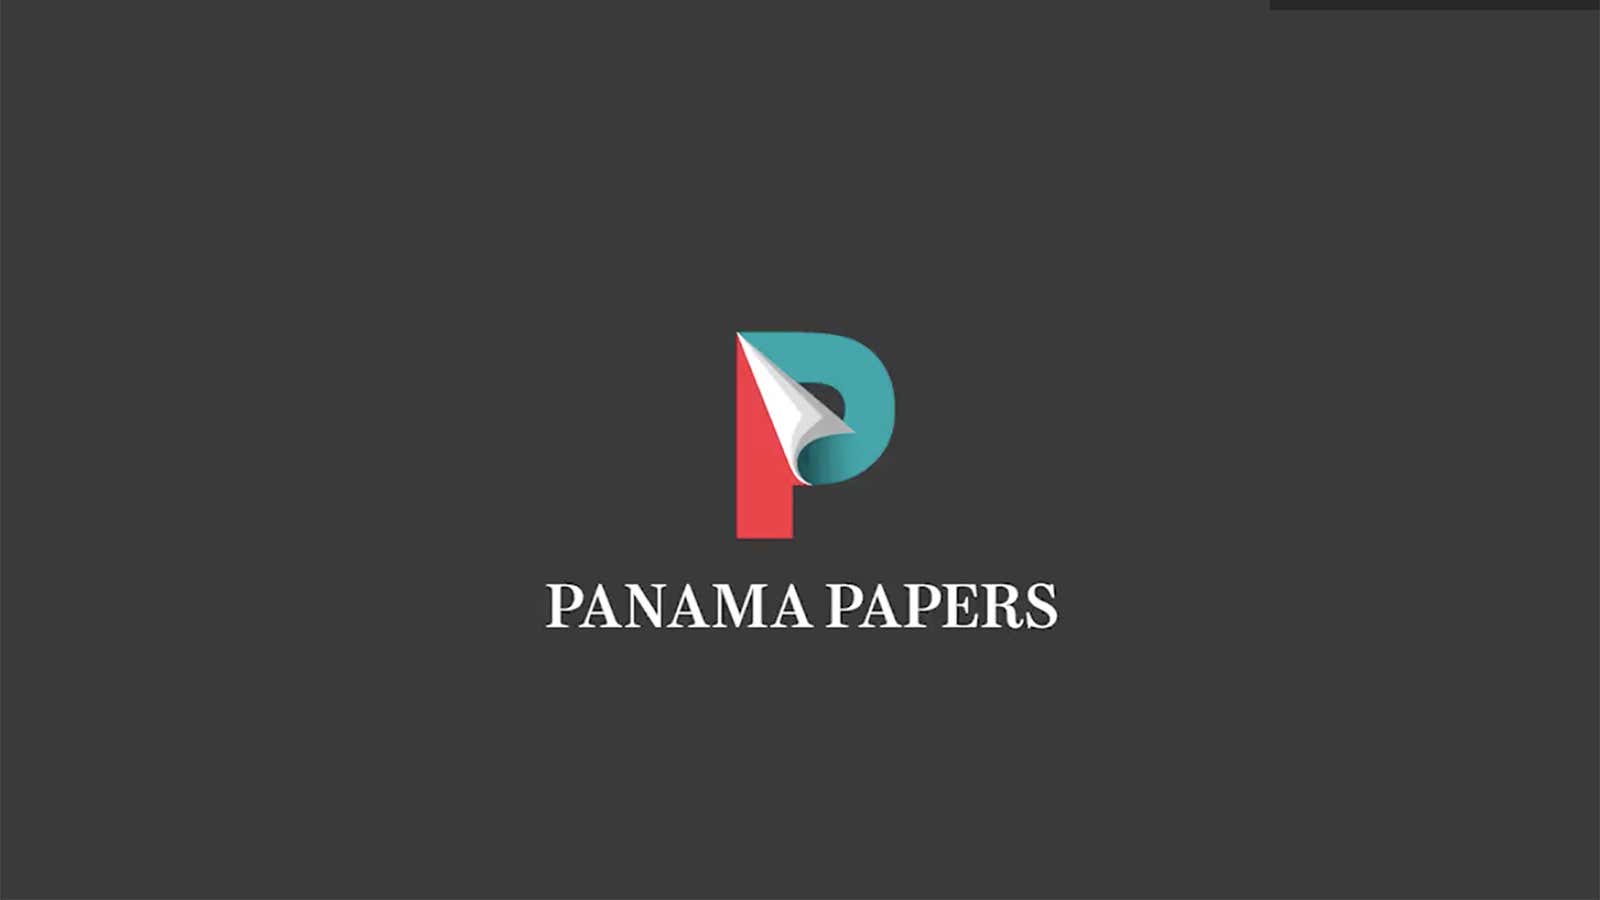 The Panama Papers: How hundreds of journalists revealed the secrets of some of the world’s most powerful people